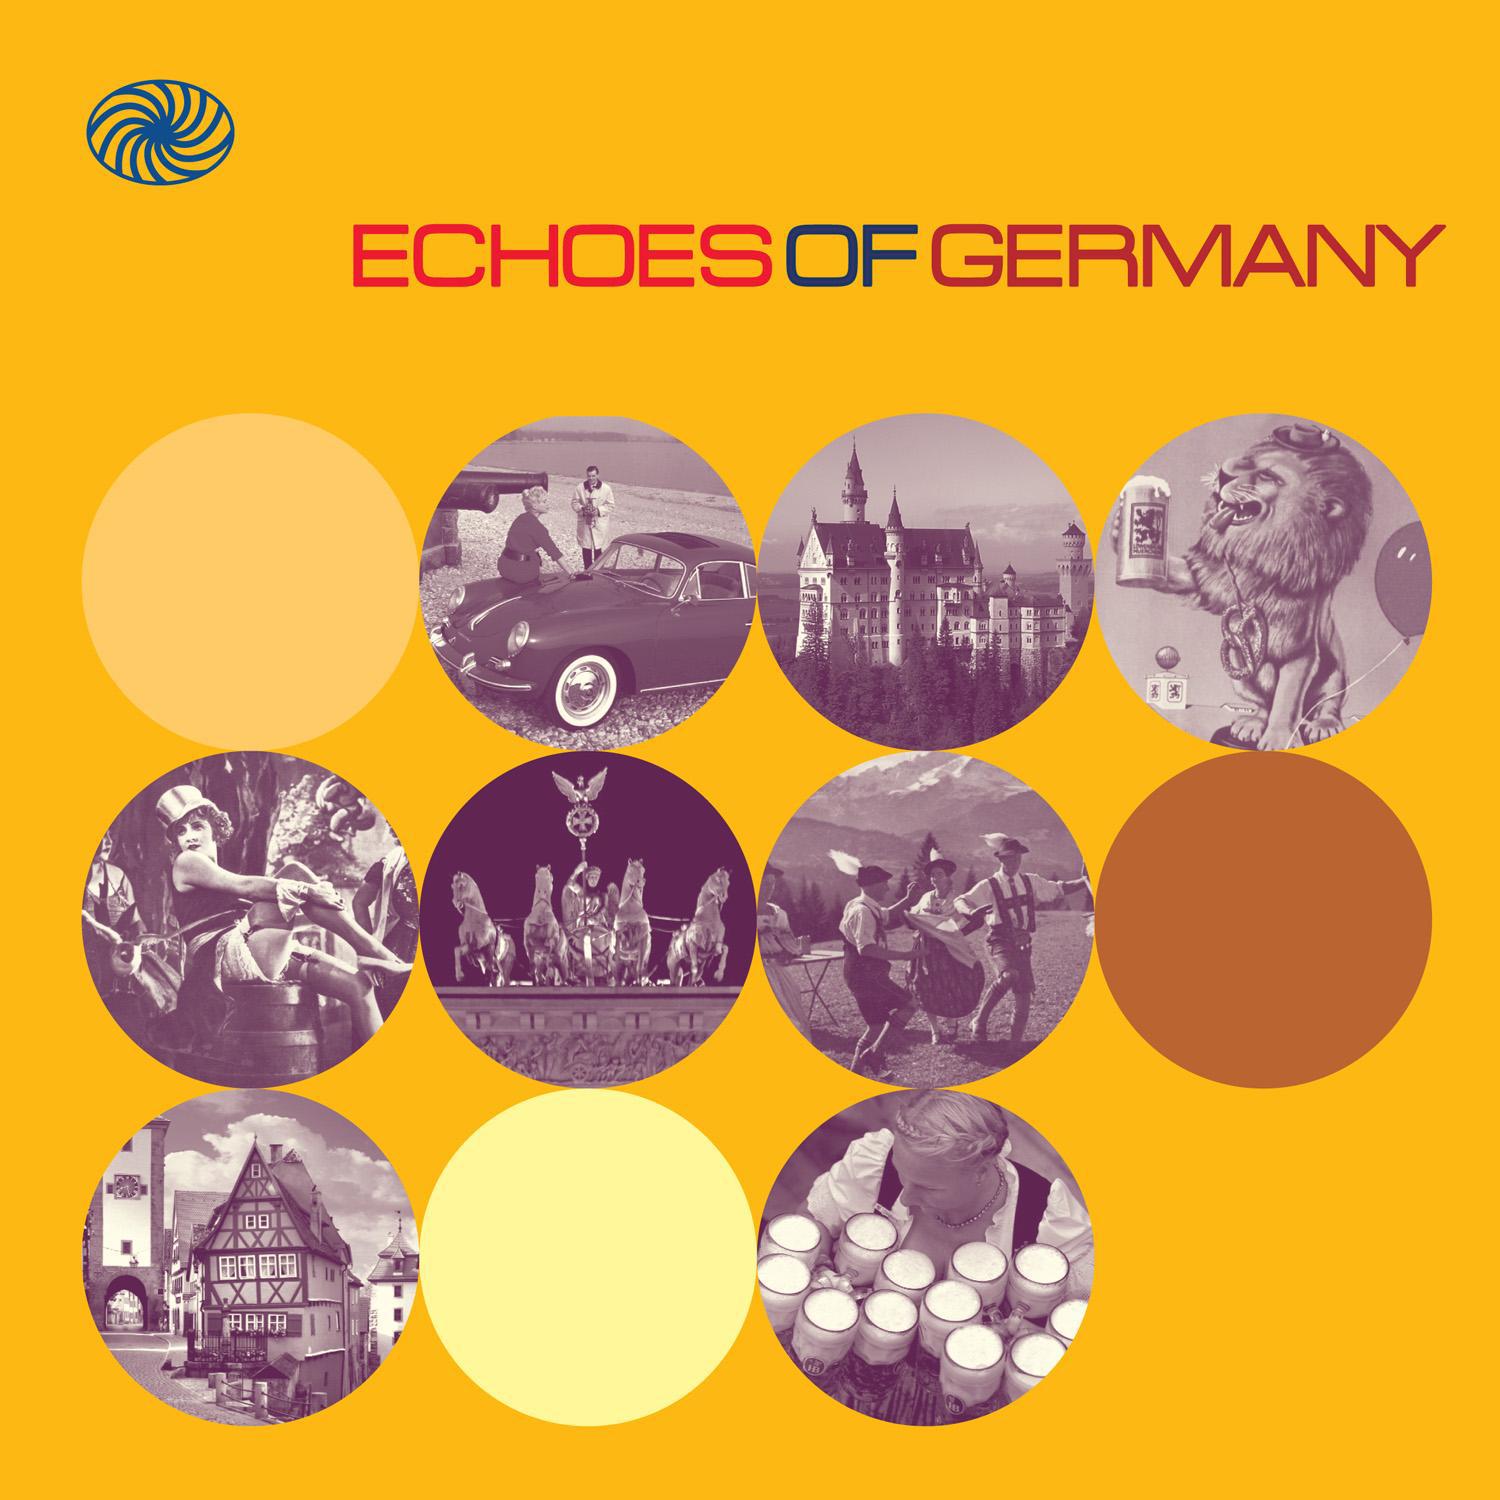 Echoes of Germany: German Popular Music of the 1950s and Early 1960s